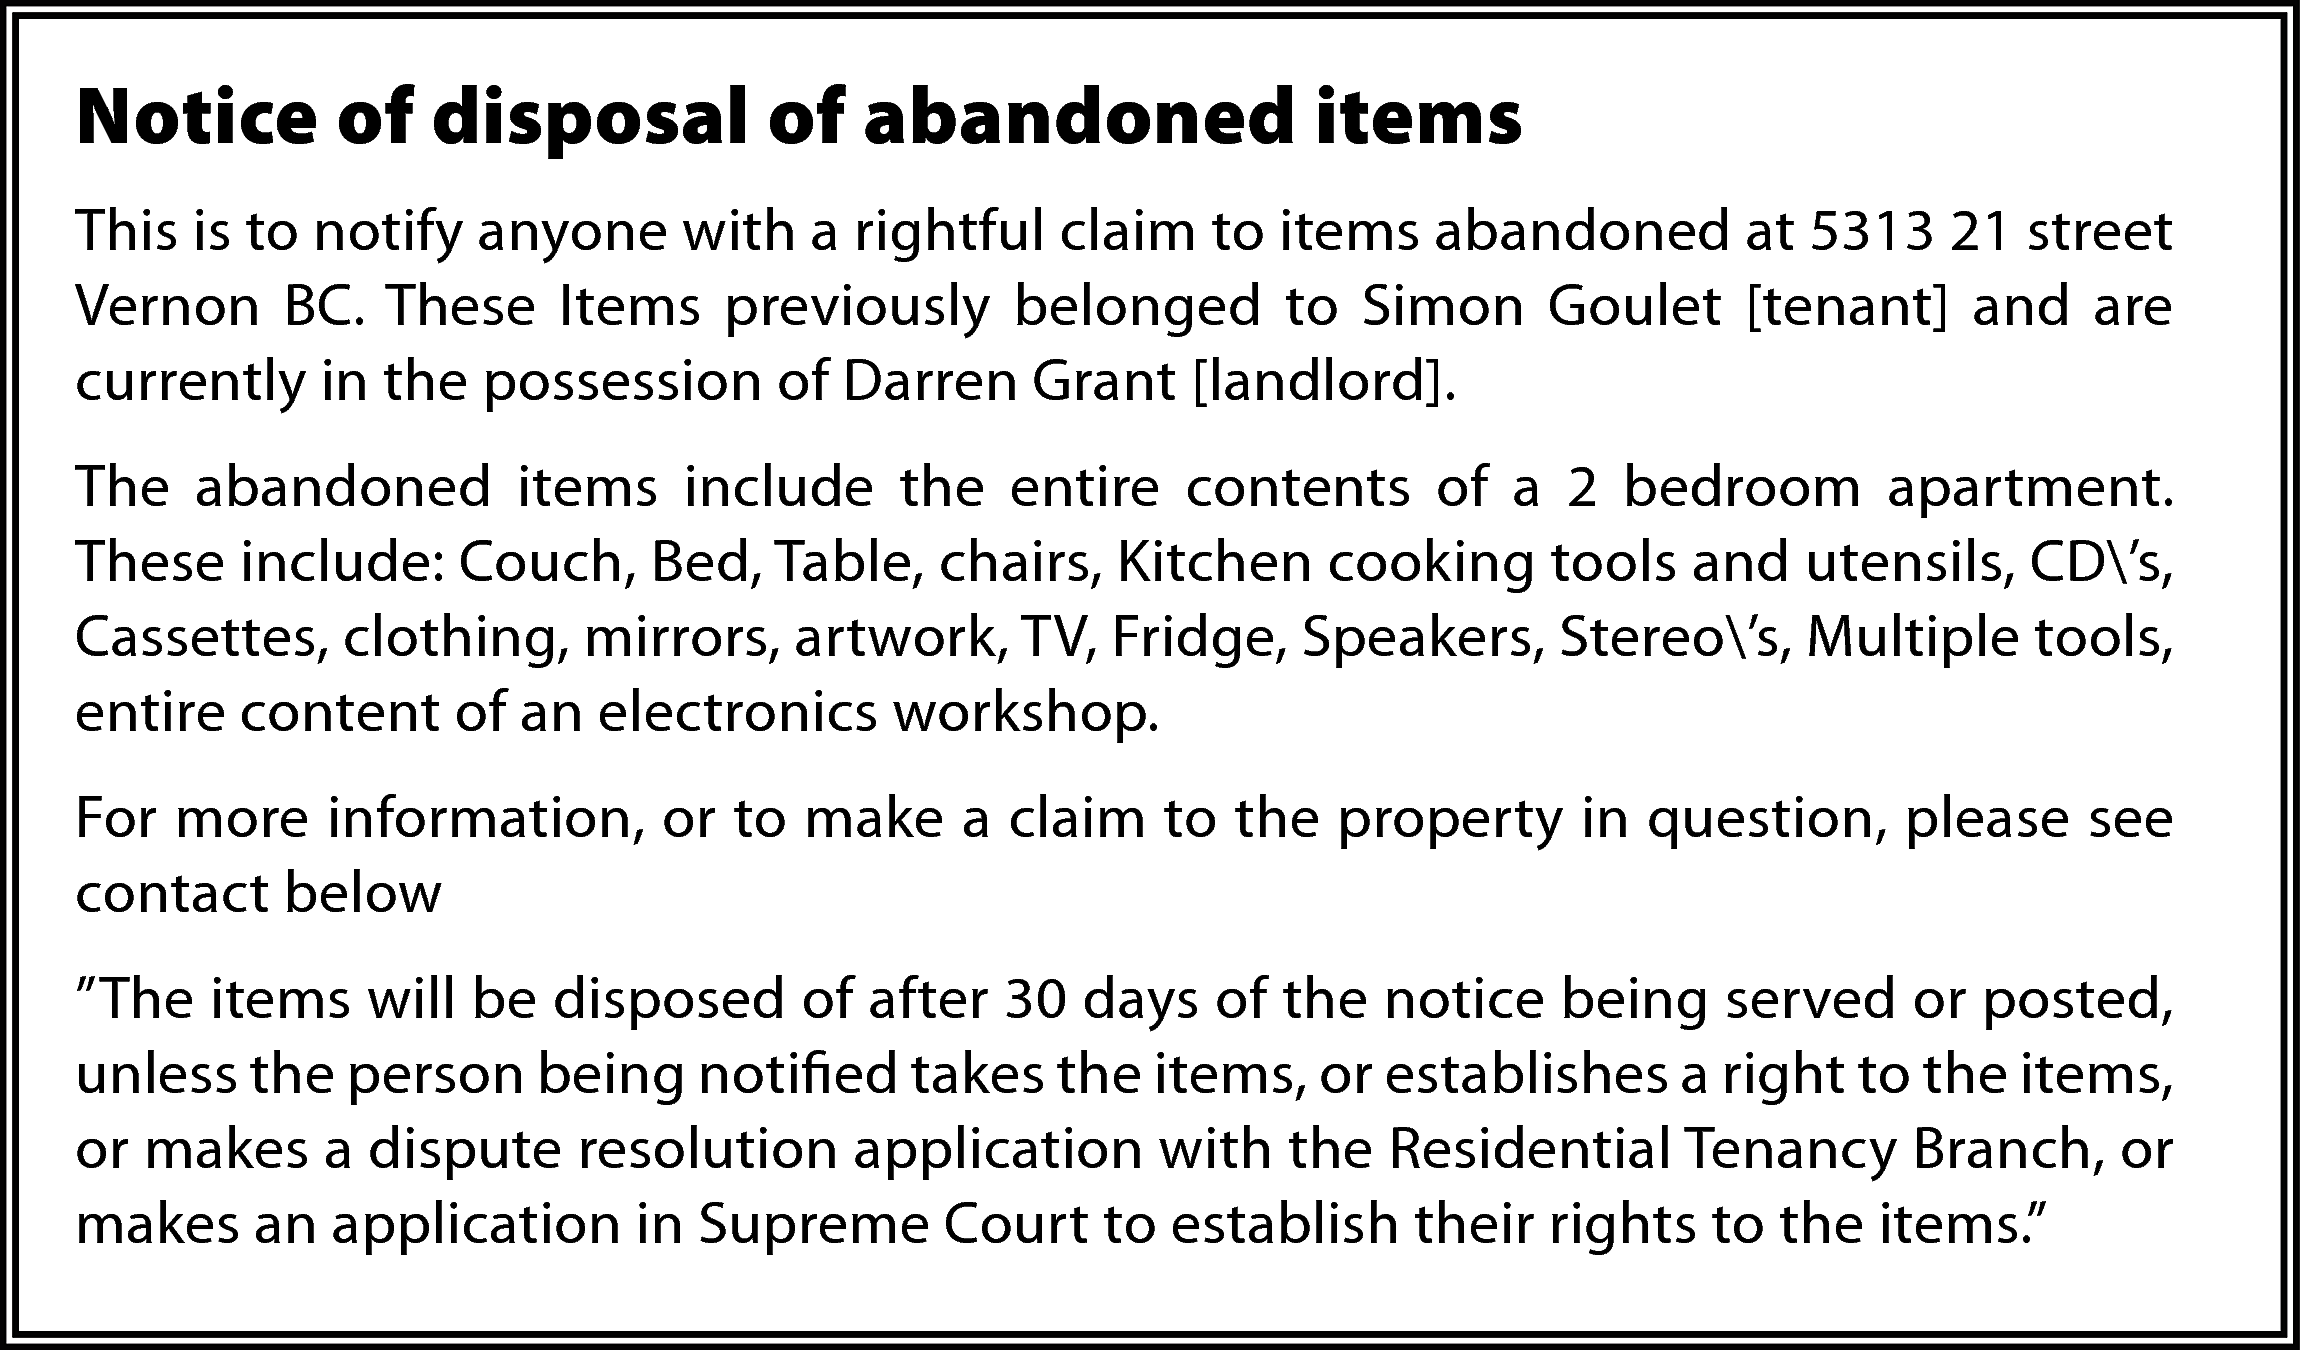 Notice of disposal of abandoned  Notice of disposal of abandoned items  This is to notify anyone with a rightful claim to items abandoned at 5313 21 street  Vernon BC. These Items previously belonged to Simon Goulet [tenant] and are  currently in the possession of Darren Grant [landlord].  The abandoned items include the entire contents of a 2 bedroom apartment.  These include: Couch, Bed, Table, chairs, Kitchen cooking tools and utensils, CD’s,  Cassettes, clothing, mirrors, artwork, TV, Fridge, Speakers, Stereo’s, Multiple tools,  entire content of an electronics workshop.  For more information, or to make a claim to the property in question, please see  contact below  ”The items will be disposed of after 30 days of the notice being served or posted,  unless the person being notified takes the items, or establishes a right to the items,  or makes a dispute resolution application with the Residential Tenancy Branch, or  makes an application in Supreme Court to establish their rights to the items.”    